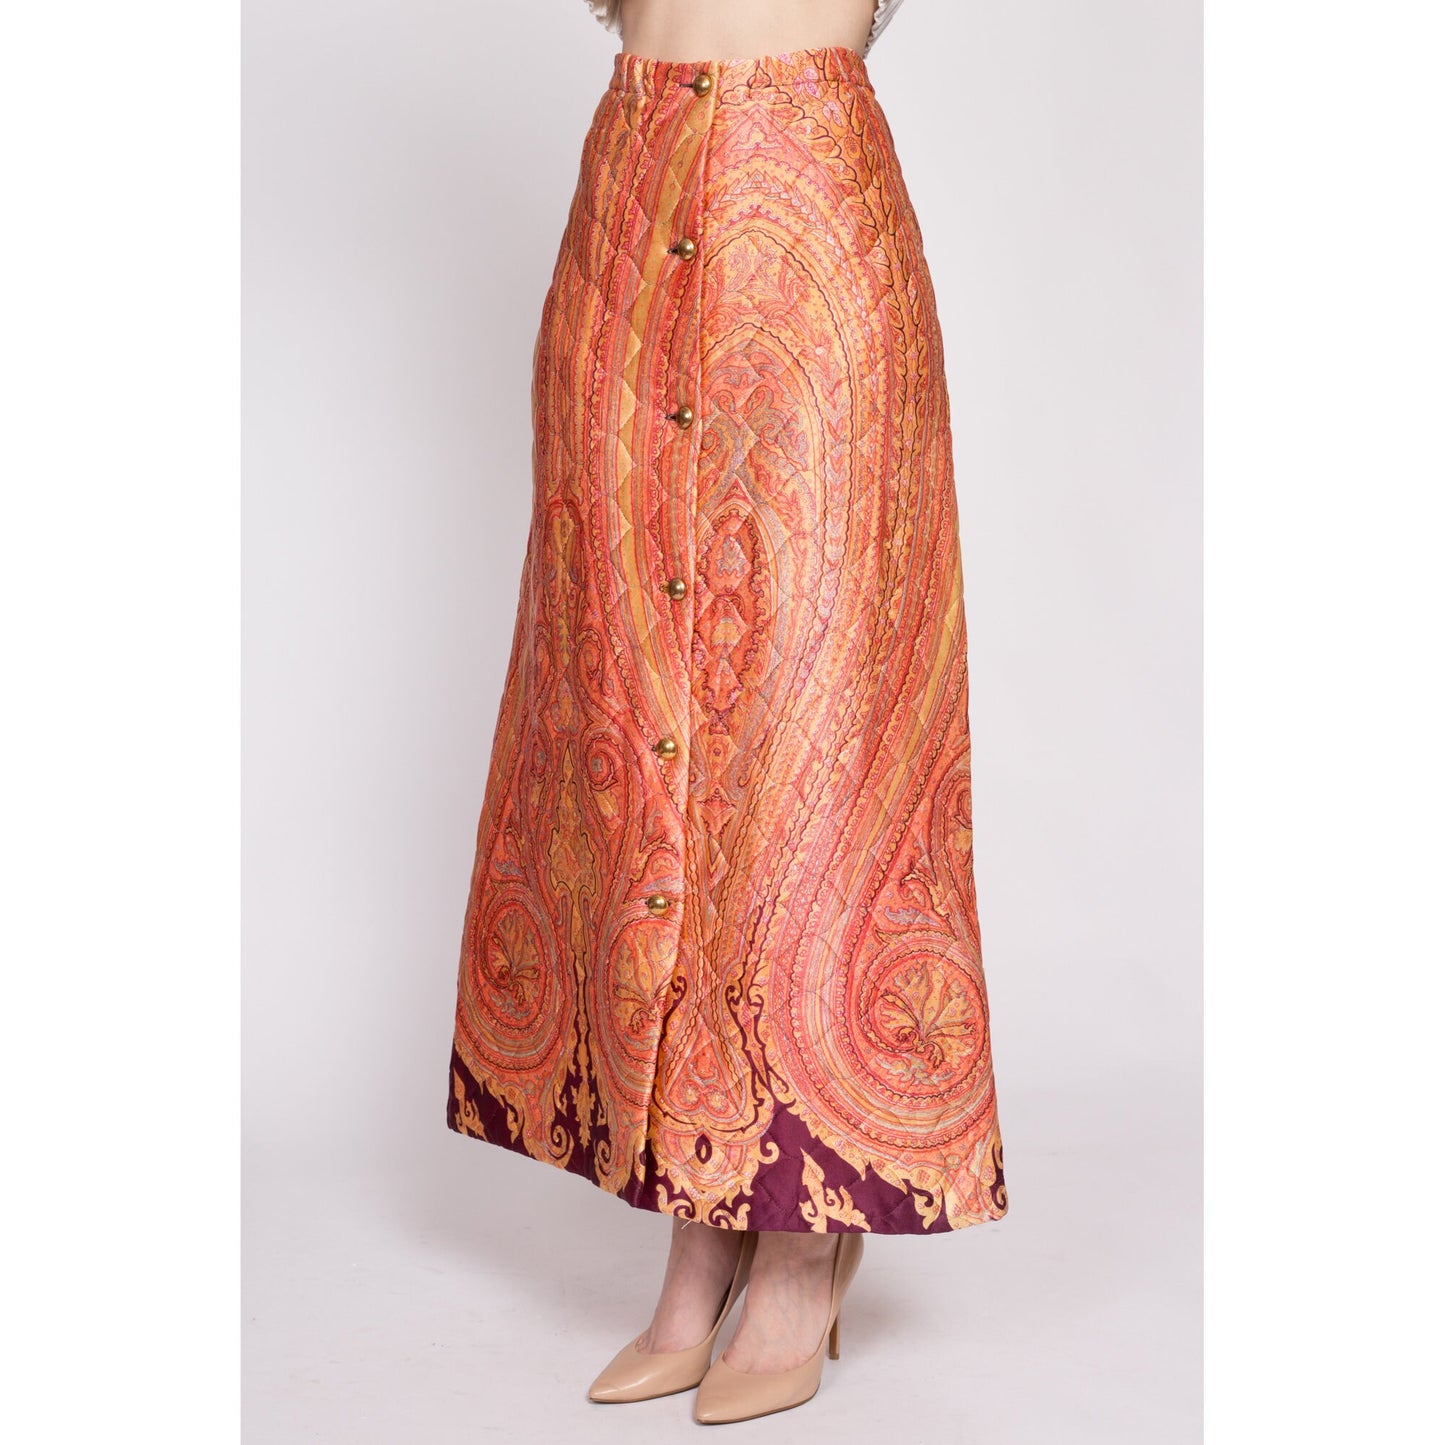 70s Psychedelic Quilted Paisley Satin Maxi Skirt - Medium to Large | Vintage Boho High Waisted A Line Button Up Skirt